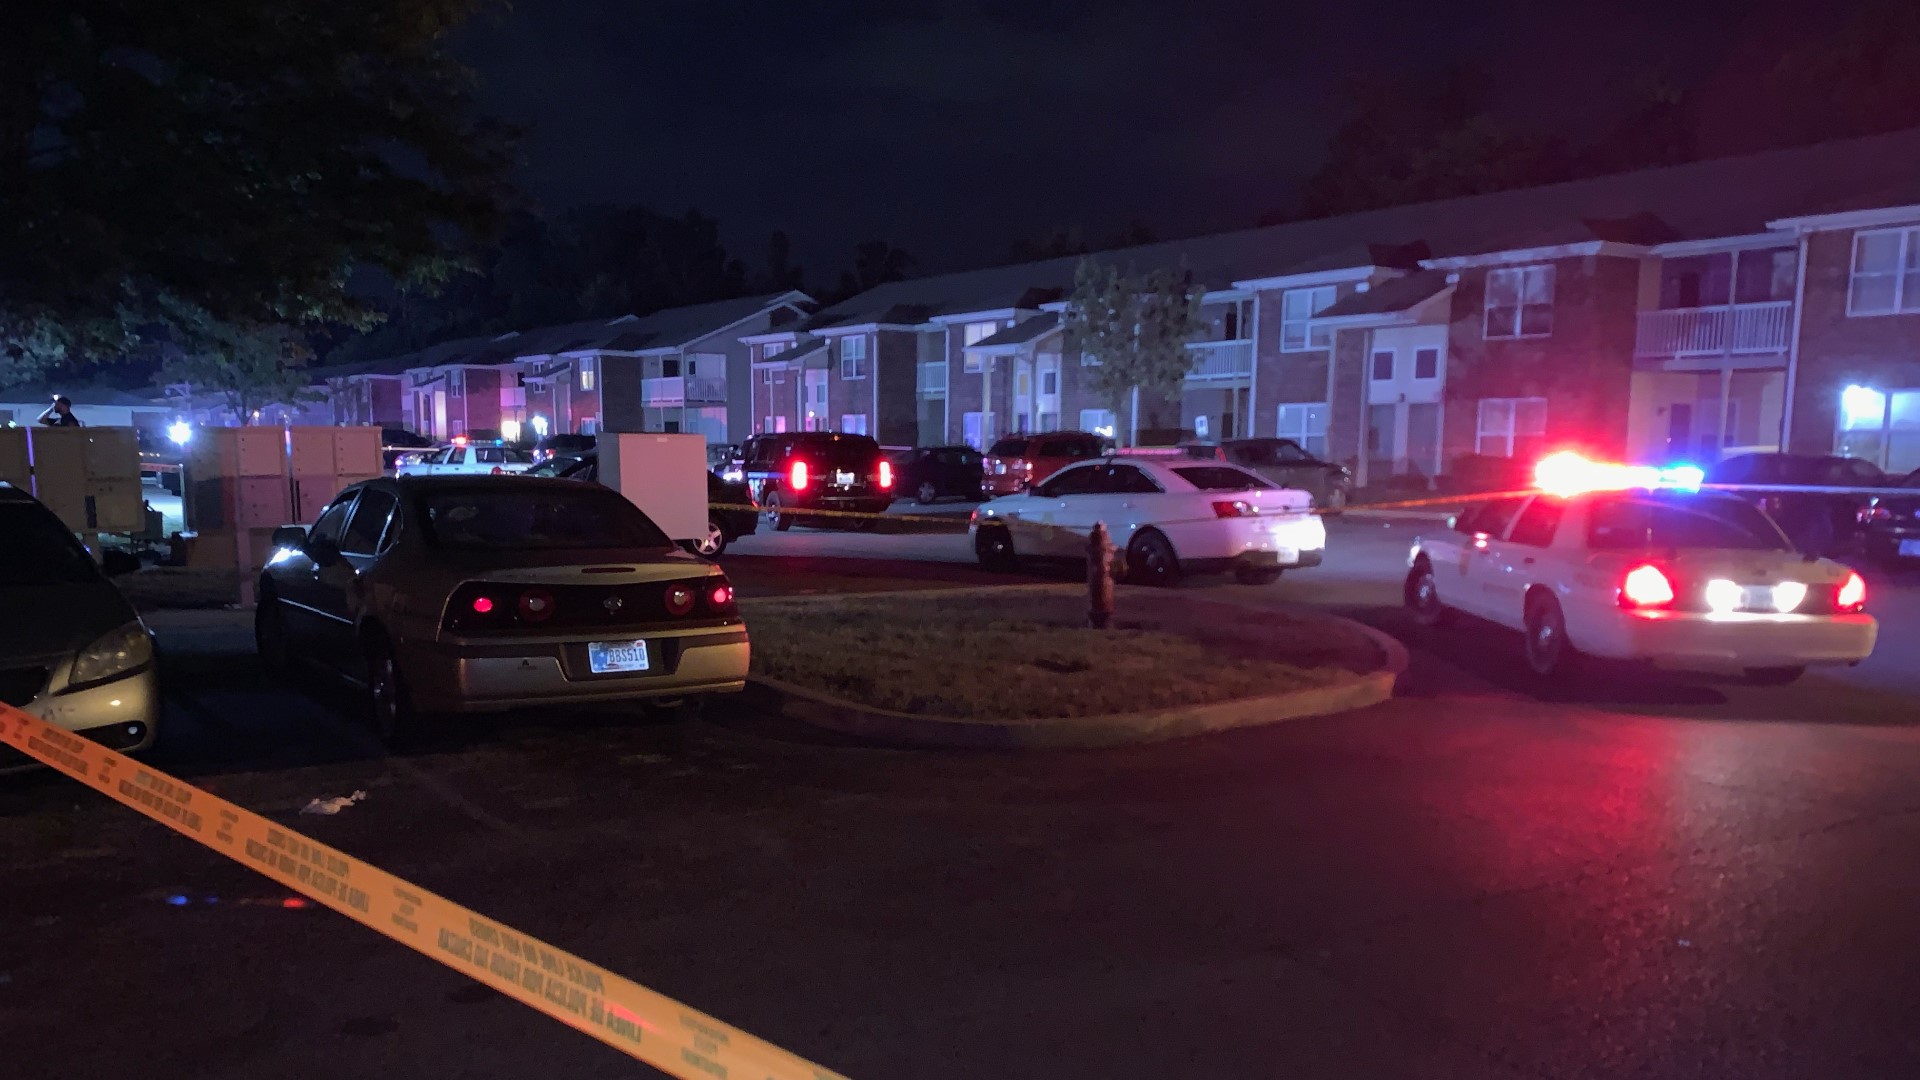 The incident happened in the 600 block of Belhaven Place, near the Washington Square Mall, just after 8 p.m.